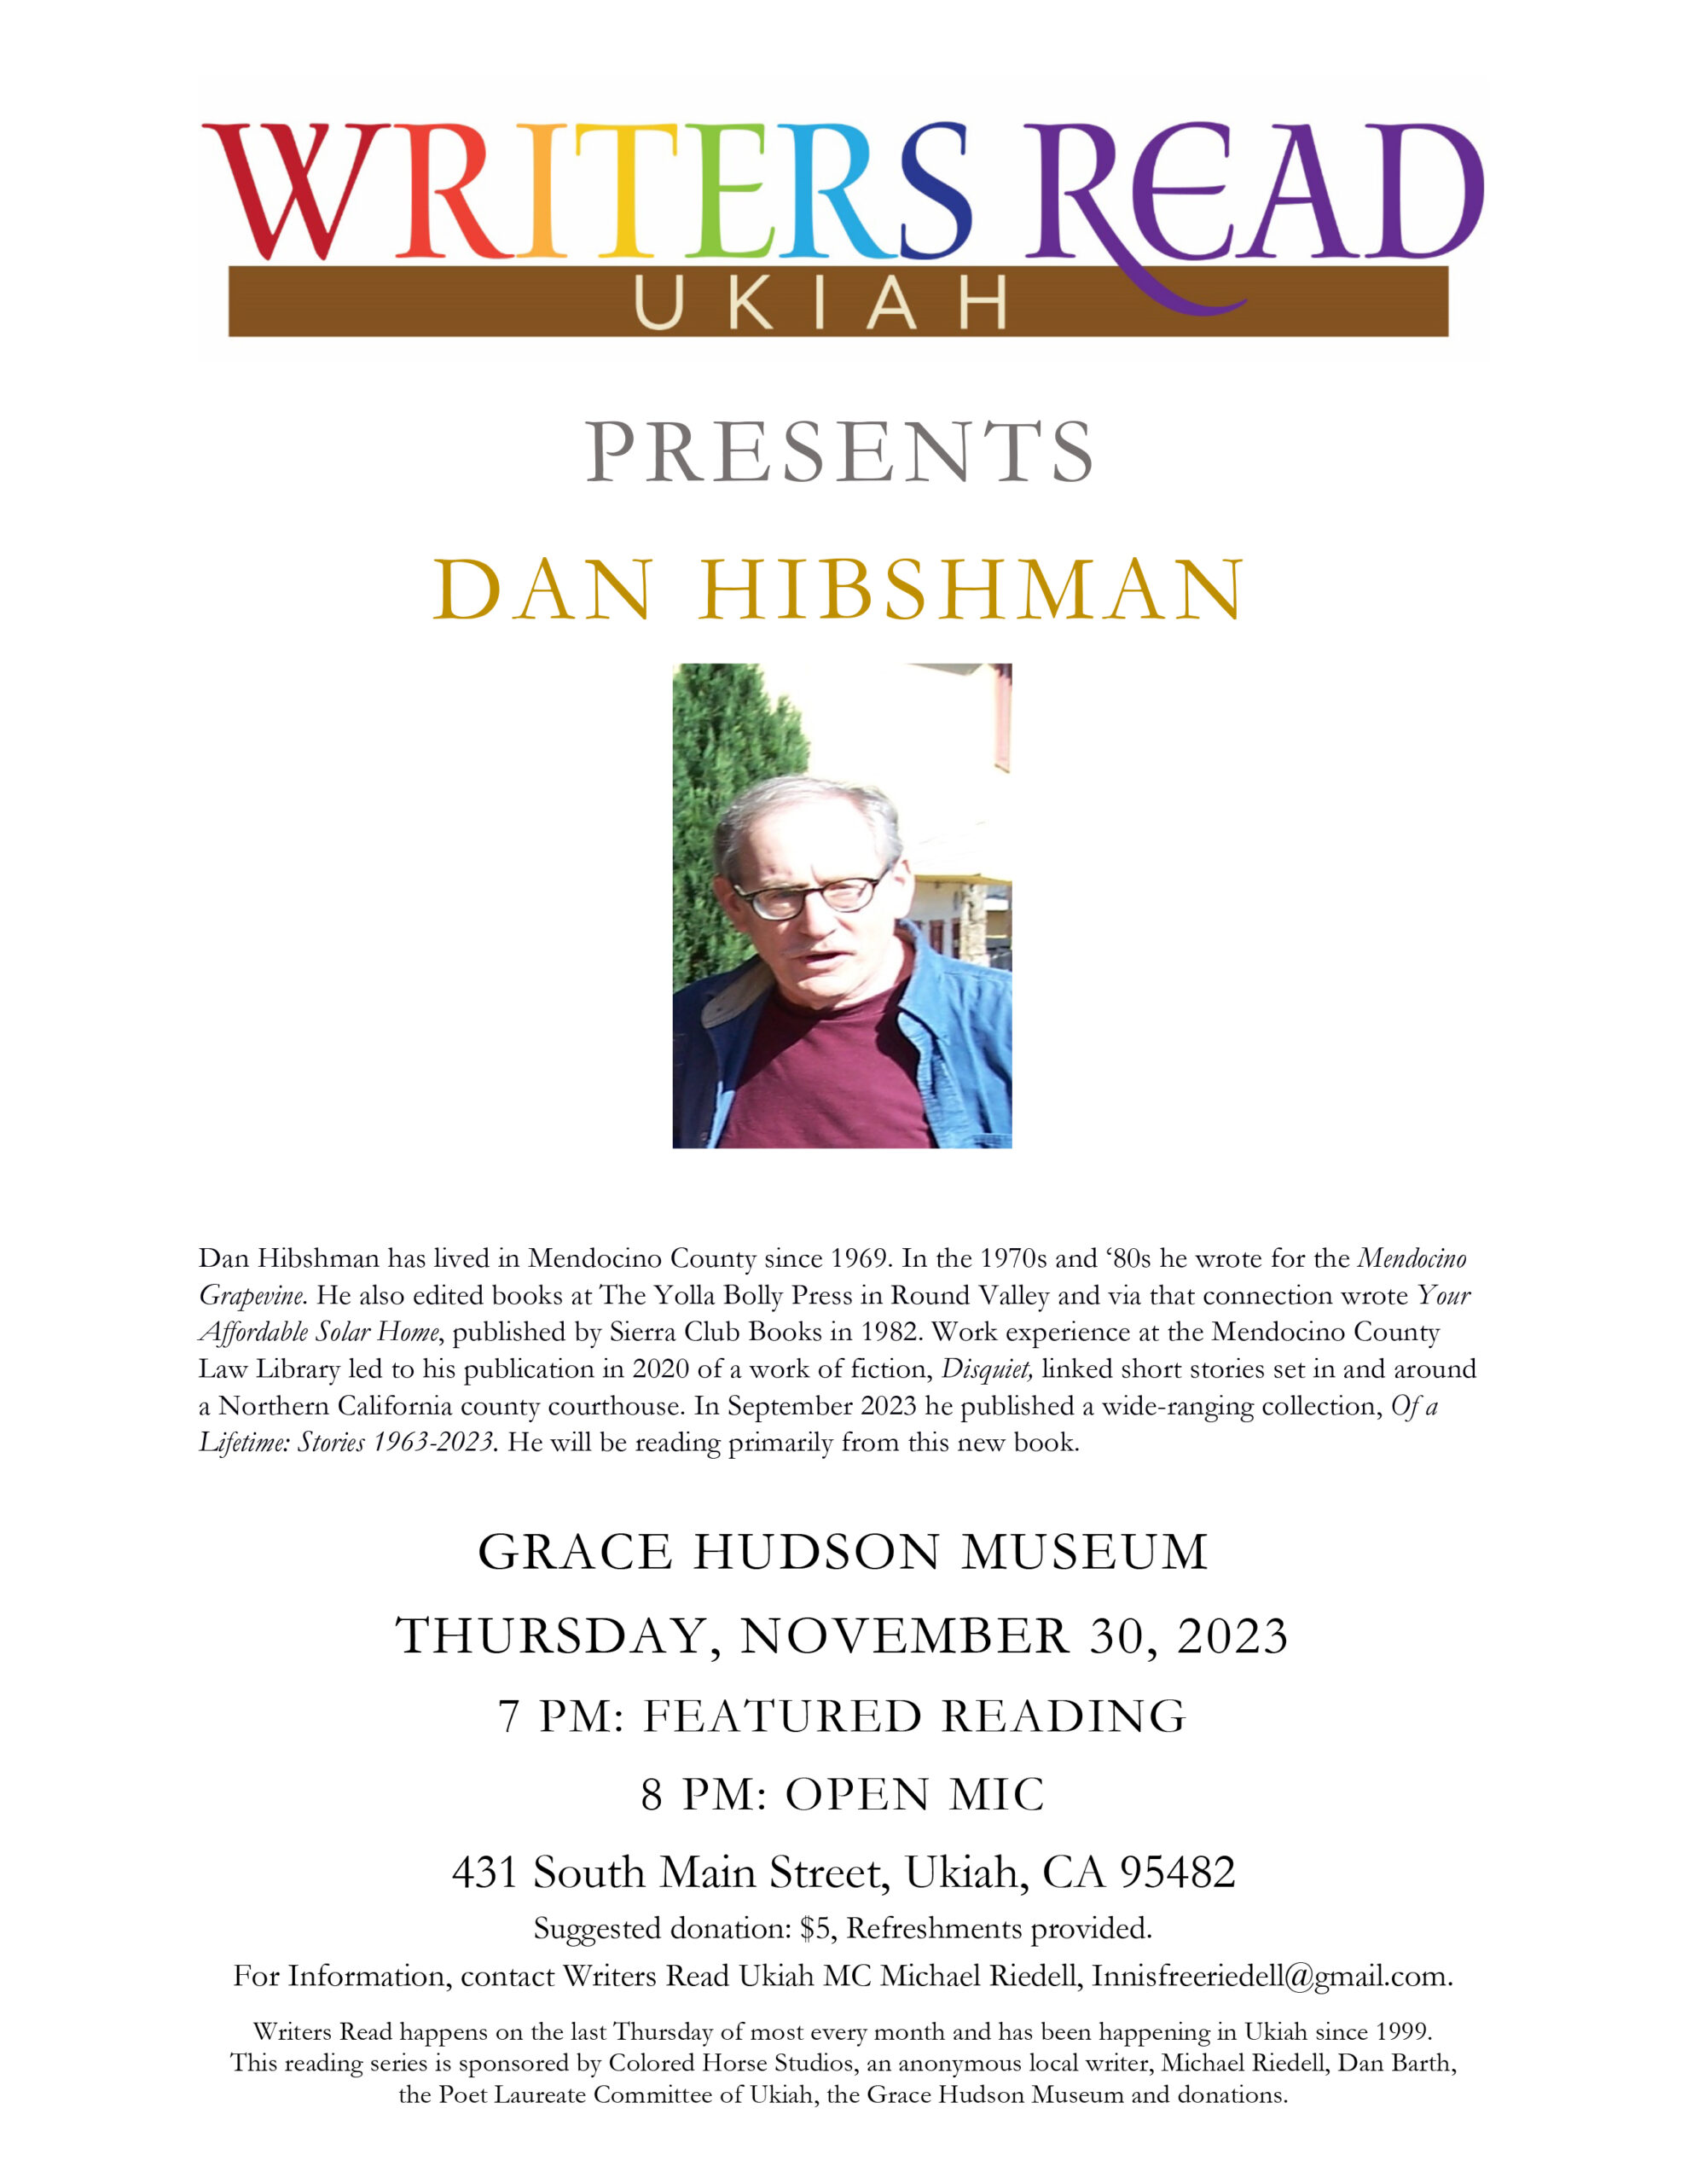 Dan Hibshman, featured reader for Writers Read on 11/30/23